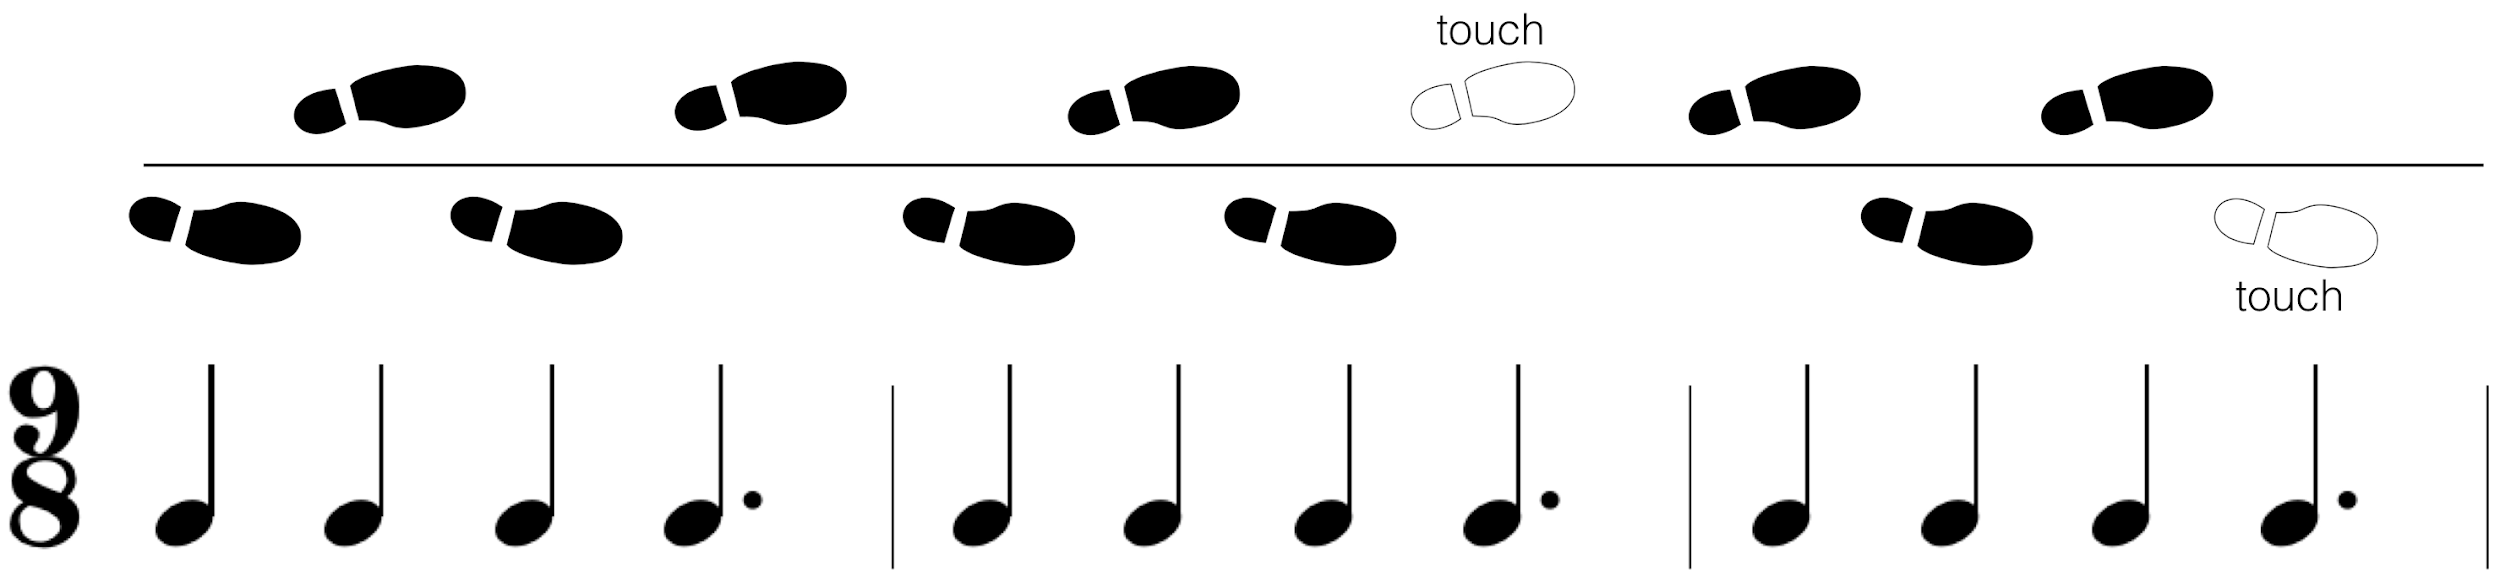 Sequence of quarter notes and dotted quarter notes with footprints above. More description below.